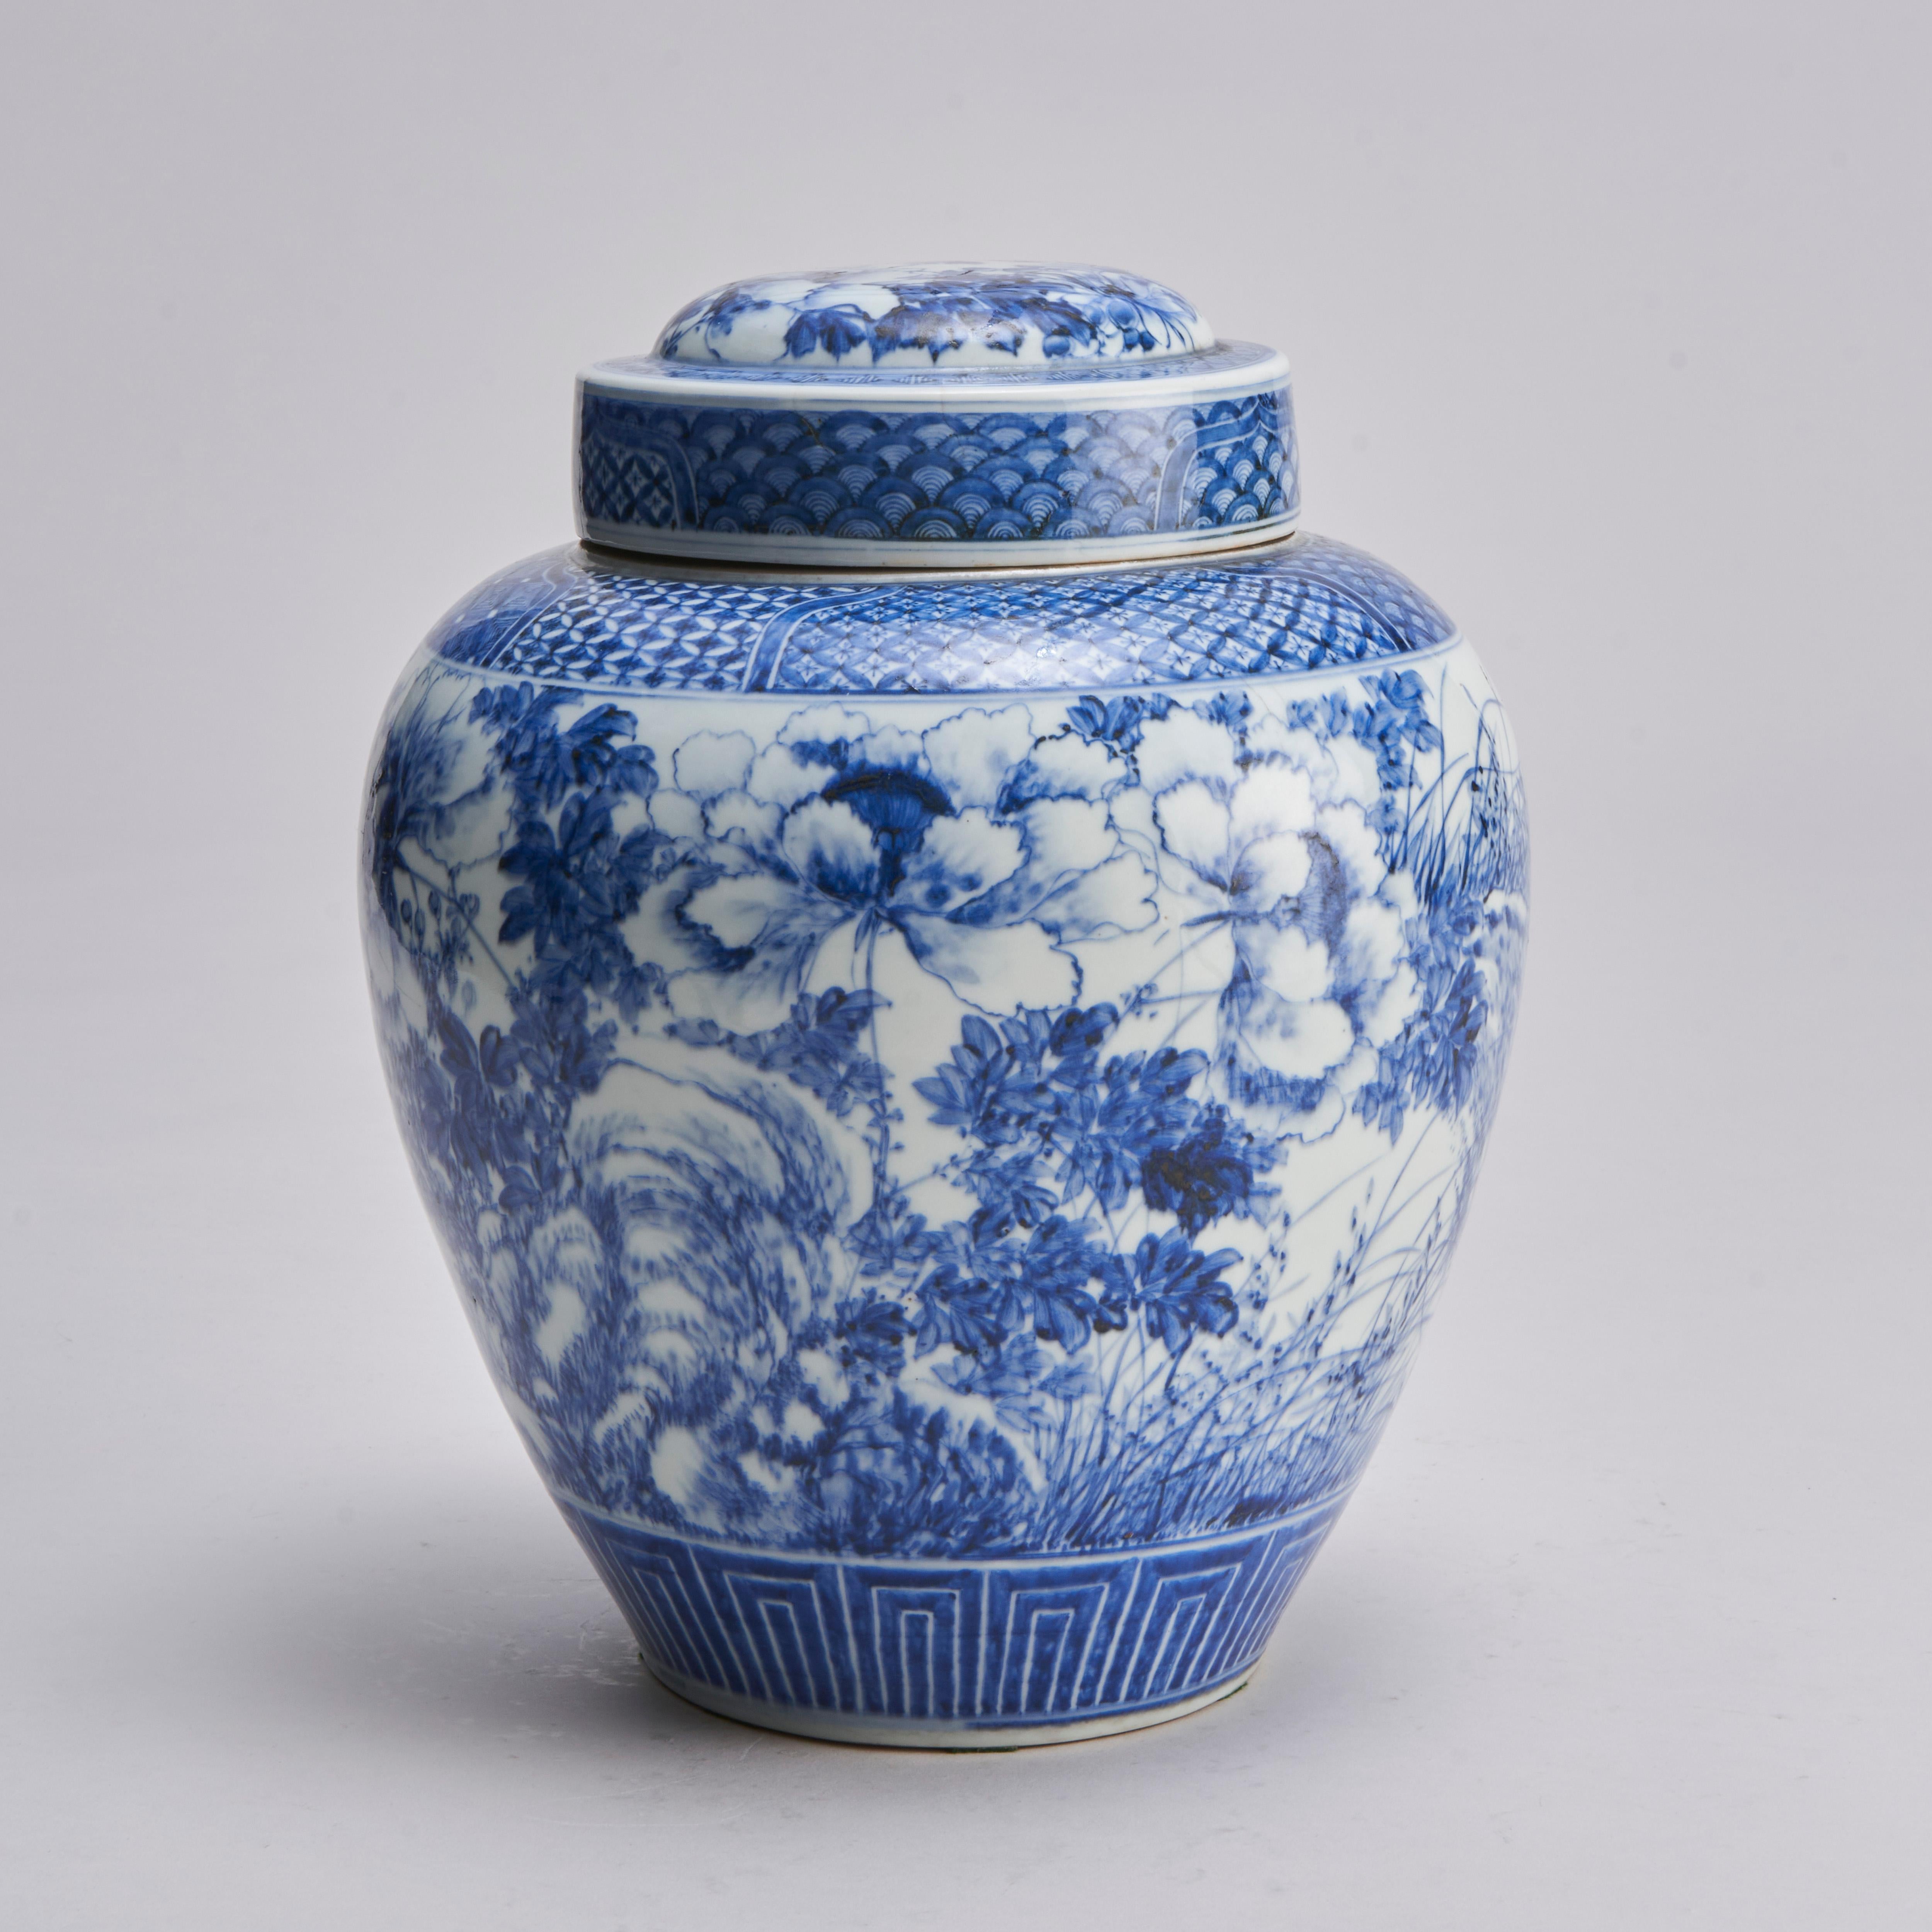 A rare example of a 19th century Japanese blue and white ginger jar with original cover and inner stopper with decorative peach knop.

The vase itself decorated with flowing images of large blossoming peonies and swaying grasses. The neck with a